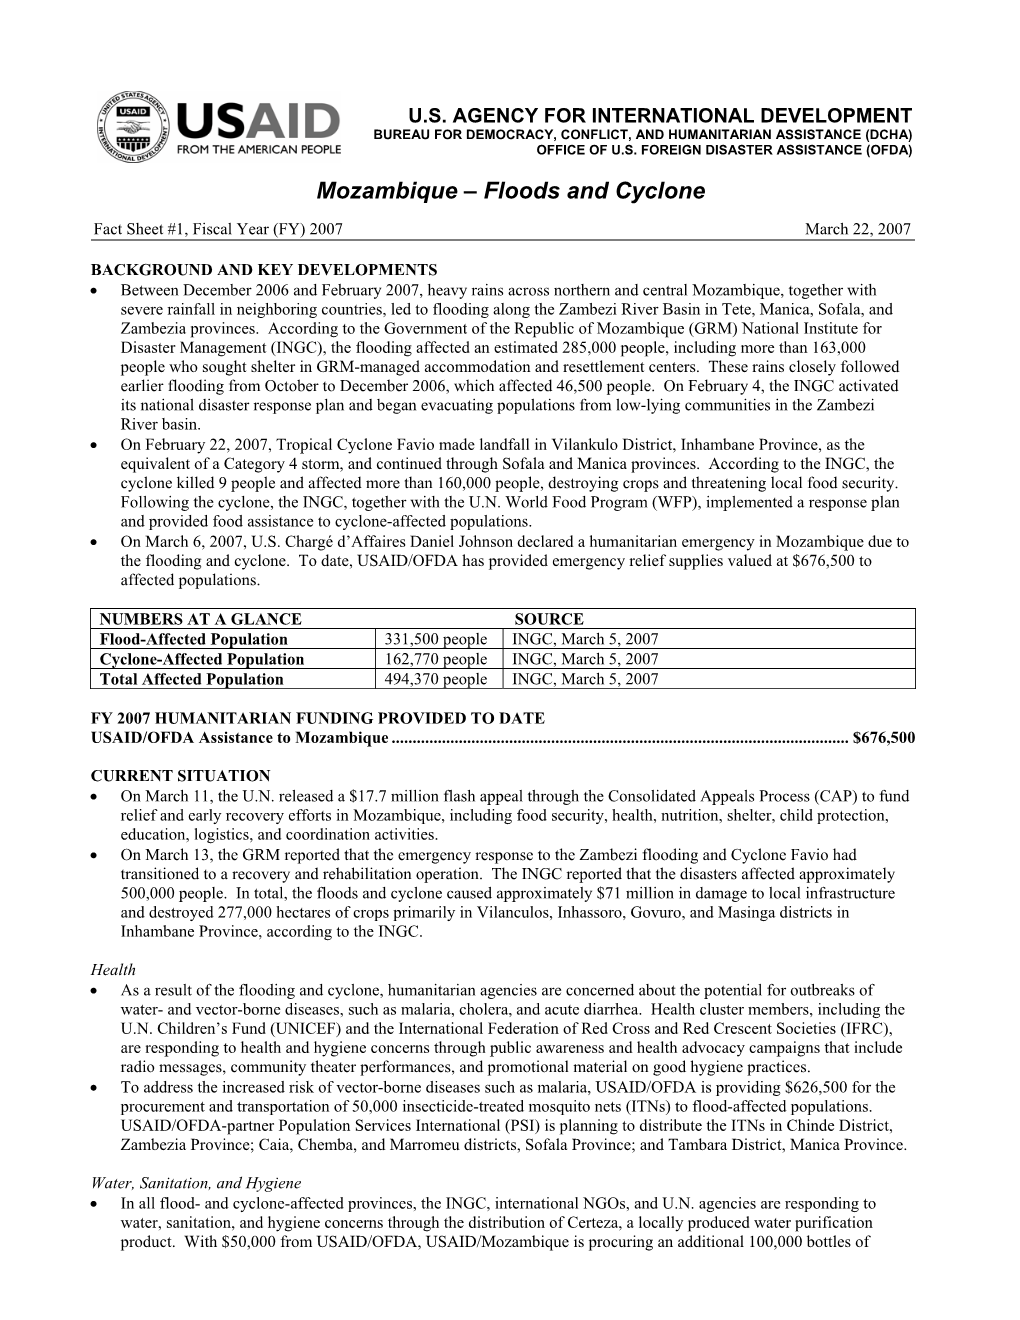 Mozambique Floods and Cyclone Fact Sheet #1